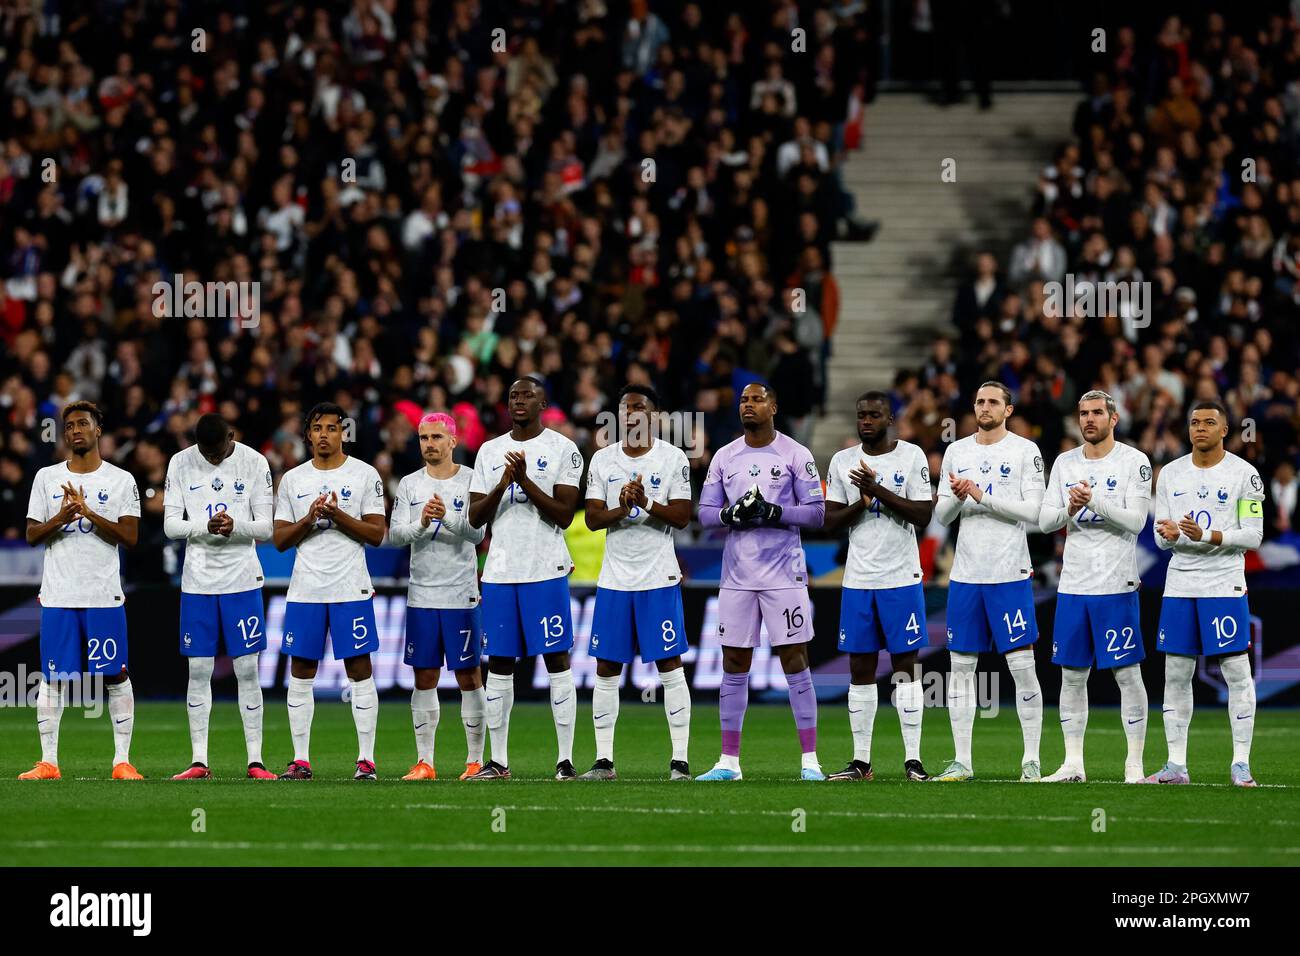 SAINT-DENIS, FRANCE - MARCH 24: Kingsley Coman of France, Randal Kolo Muani of France, Jules Kounde of France, Antoine Griezmann of France, Ibrahima Konate of France, Aurelien Tchouameni of France, Mike Maignan of France, Dayot Upamecano of France, Adrien Rabiot of France, Theo Hernandez of France and Kylian Mbappe of France line up for a moment of silence prior to the UEFA EURO 2024 Qualifying Round Group B match between France and Netherlands at Stade de France on March 24, 2023 in Saint-Denis, France (Photo by Marcel ter Bals/Orange Pictures) Stock Photo